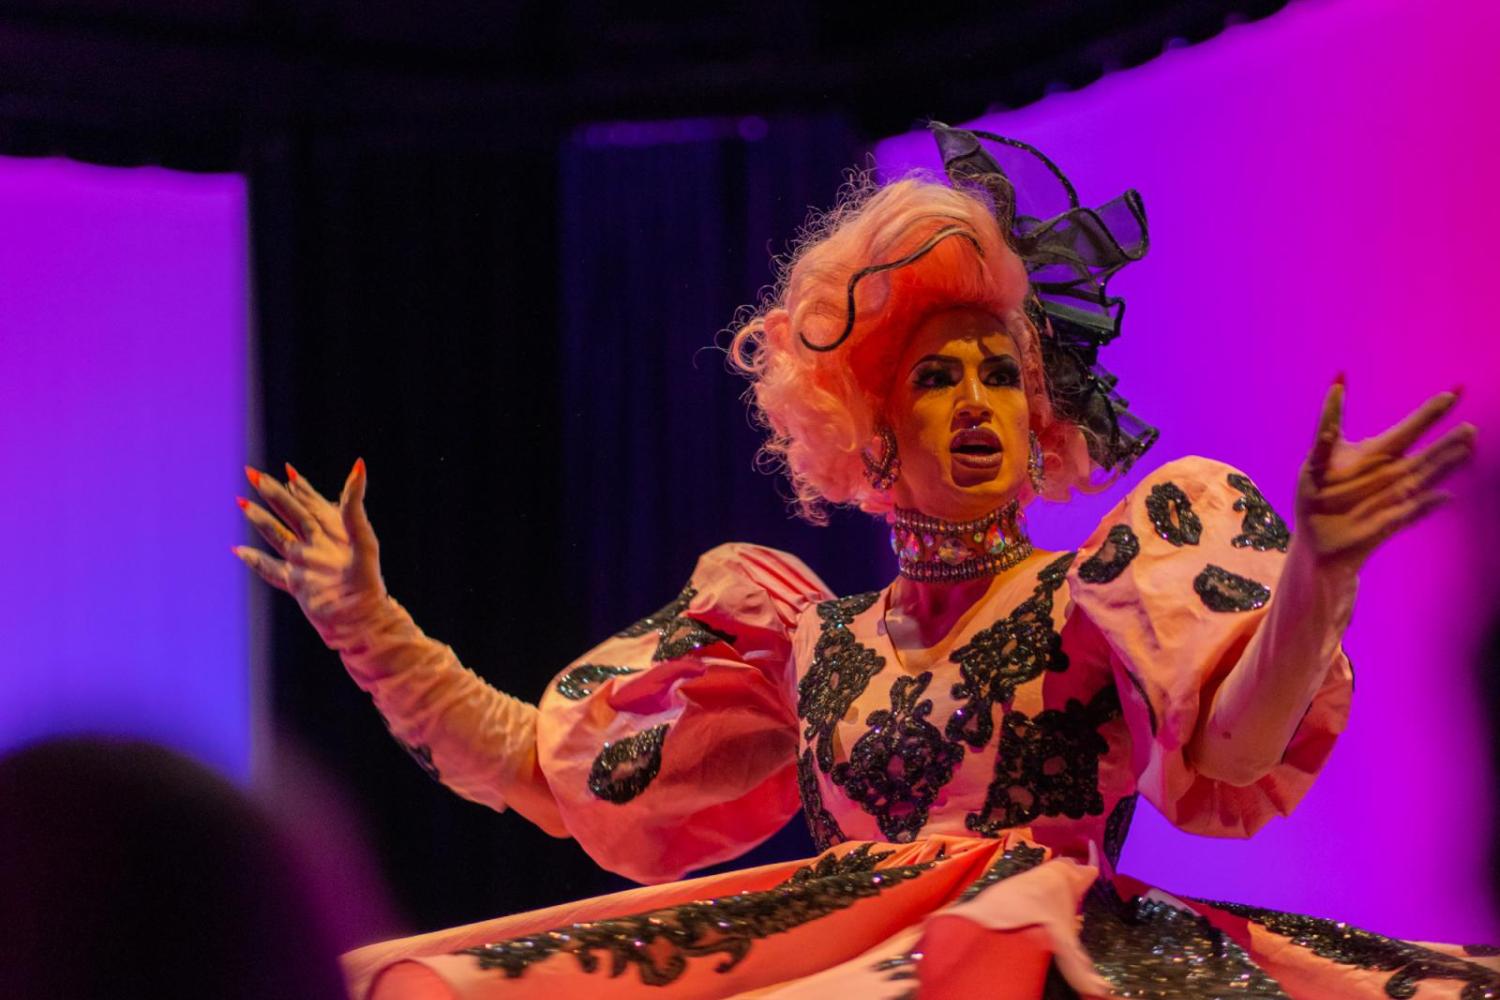 drag queen performing in a pink spinning dress